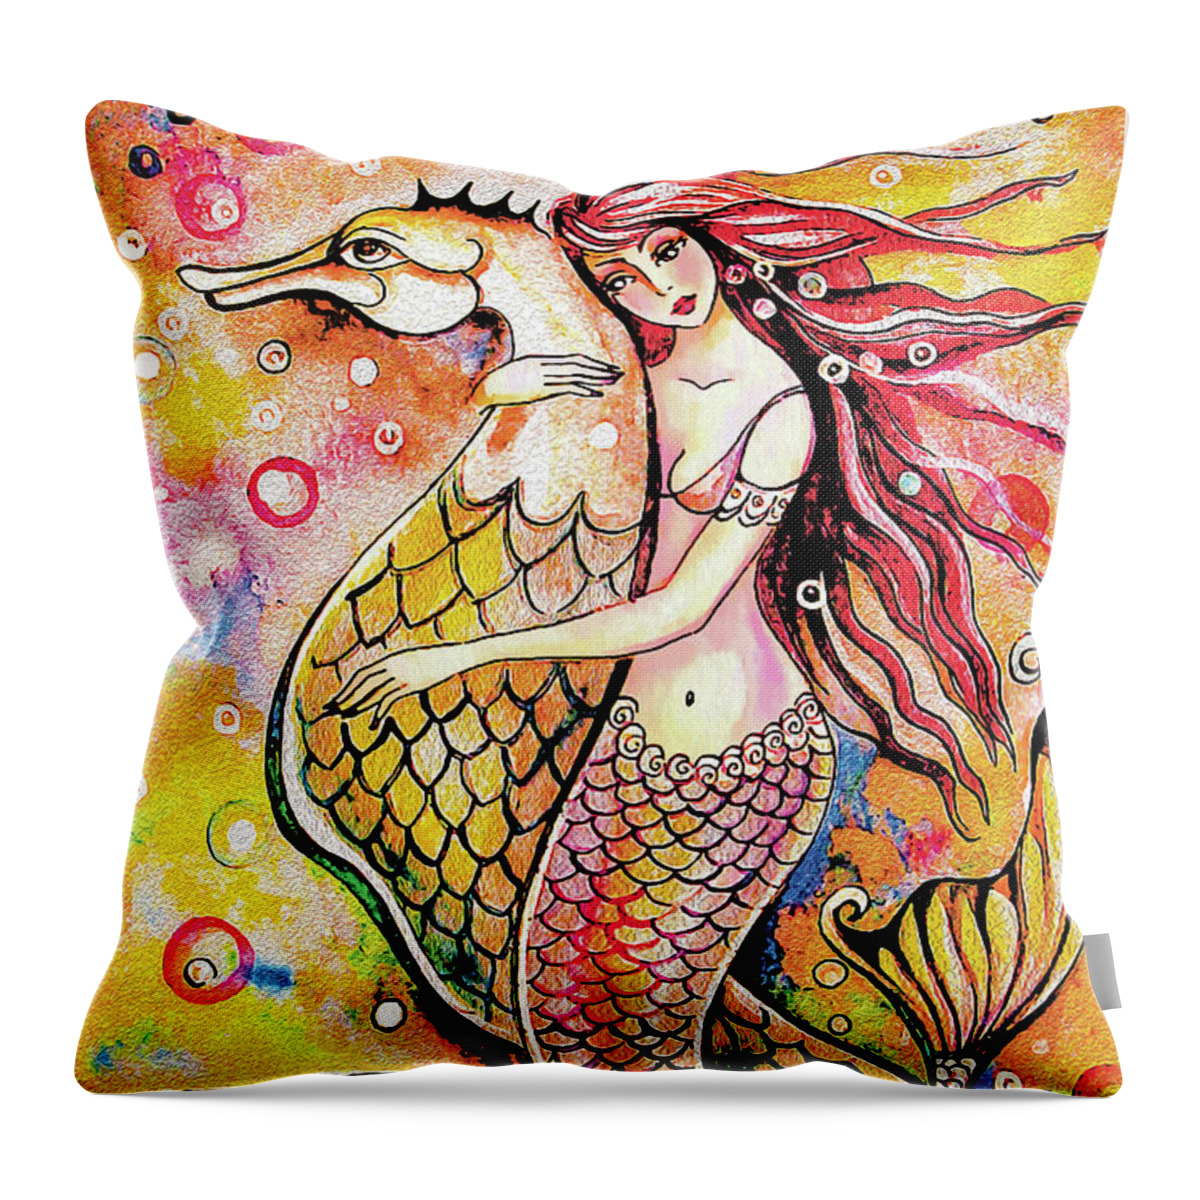 Sea Goddess Throw Pillow featuring the painting Black Sea Mermaid by Eva Campbell